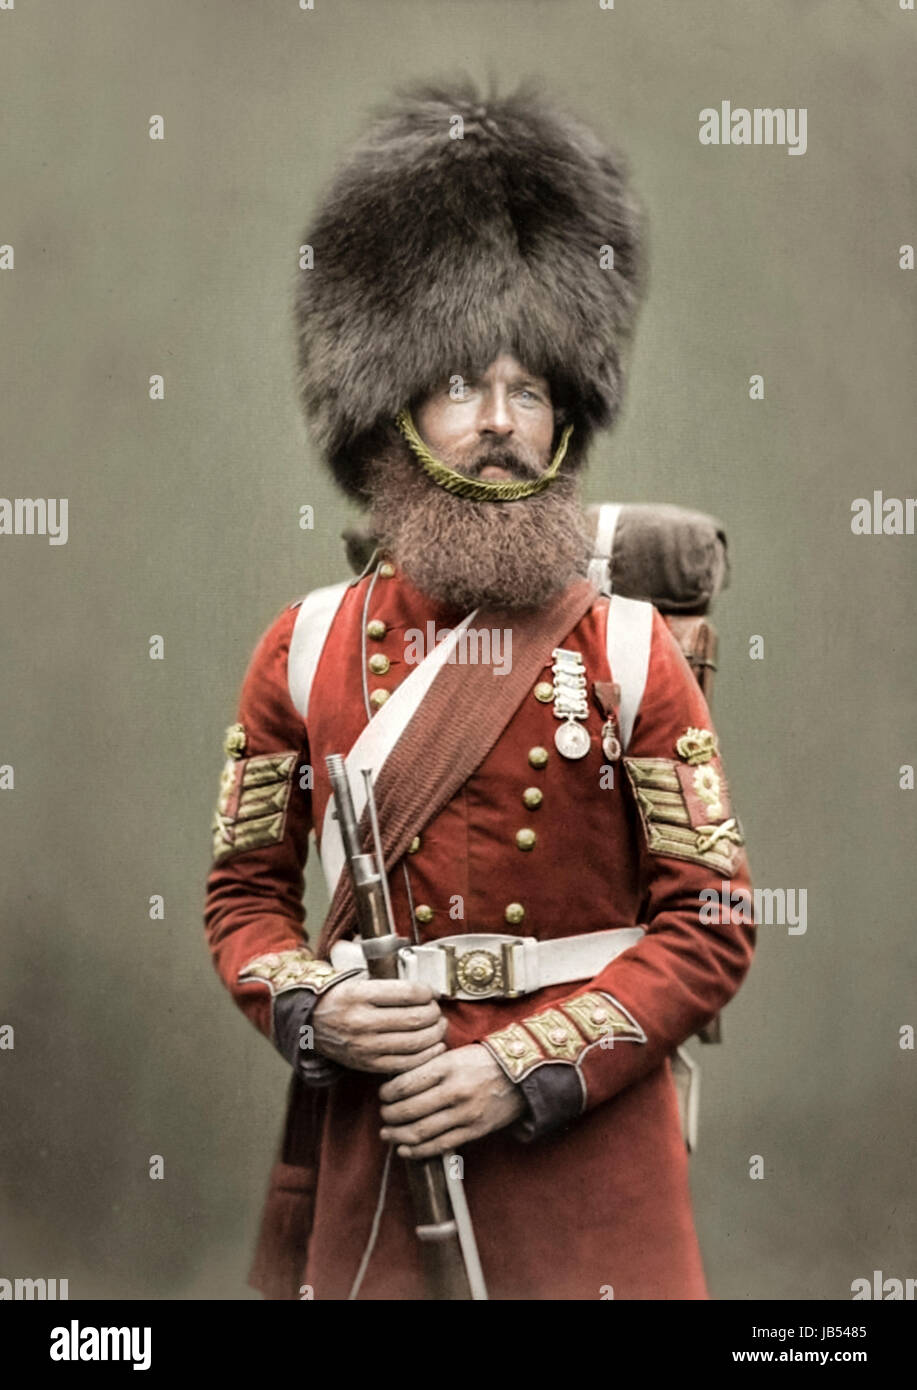 Colour Sergeant William McGregor of the Scots Fusiliers Guards photographed on his return from the Crimean War in July 1856 by Robert Howlett and Joseph Cundall as part of a series entitled 'Crimean Heroes 1856' and later colourised. Stock Photo